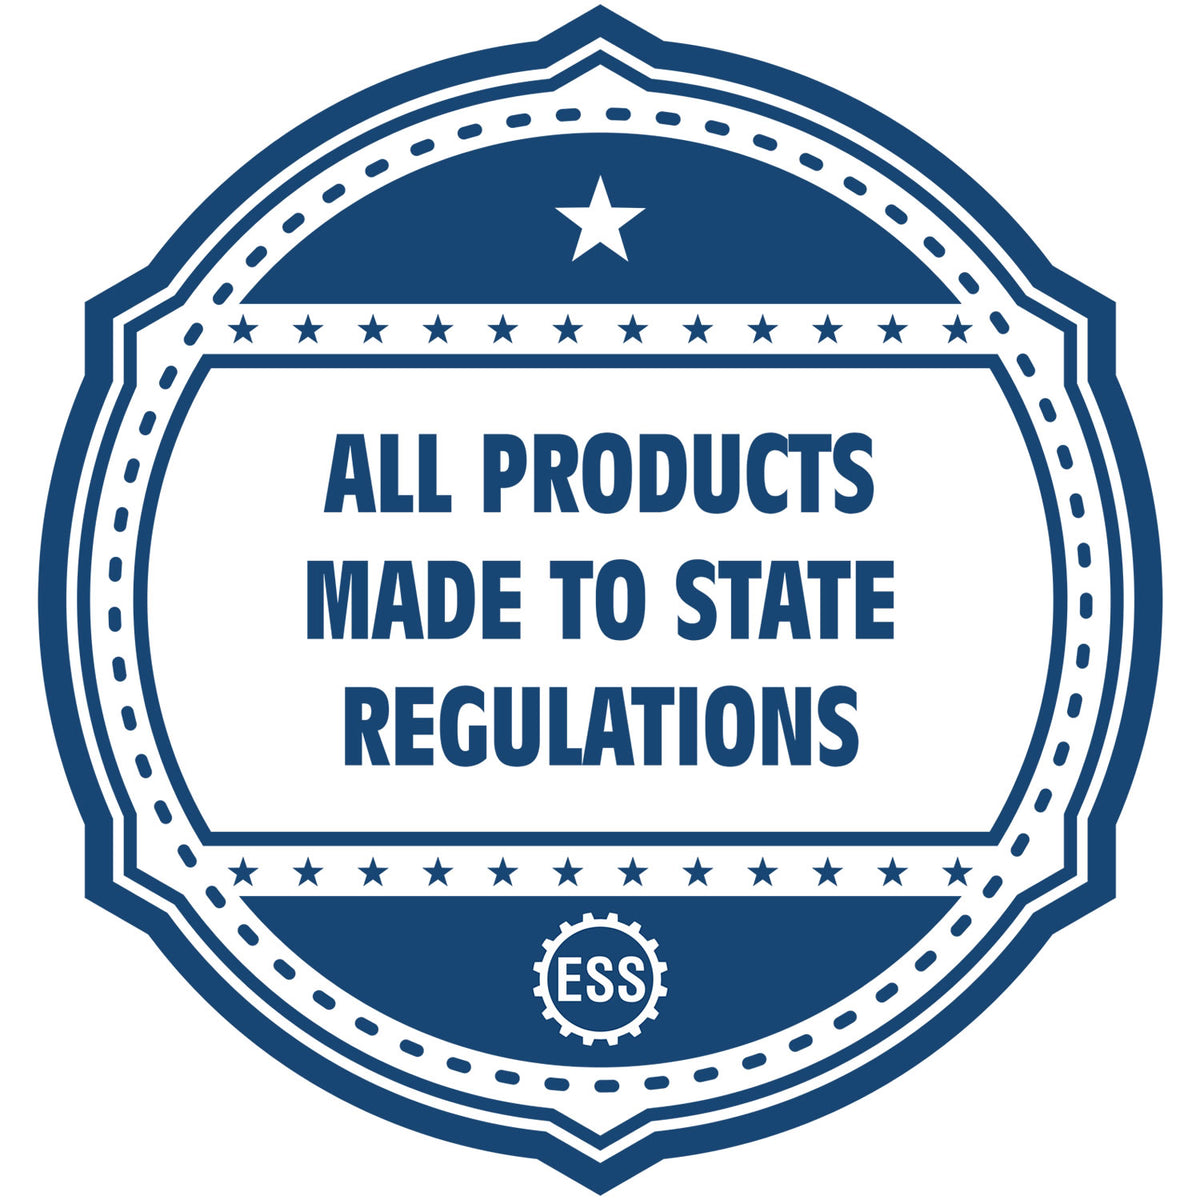 An icon or badge element for the Self-Inking Missouri PE Stamp showing that this product is made in compliance with state regulations.